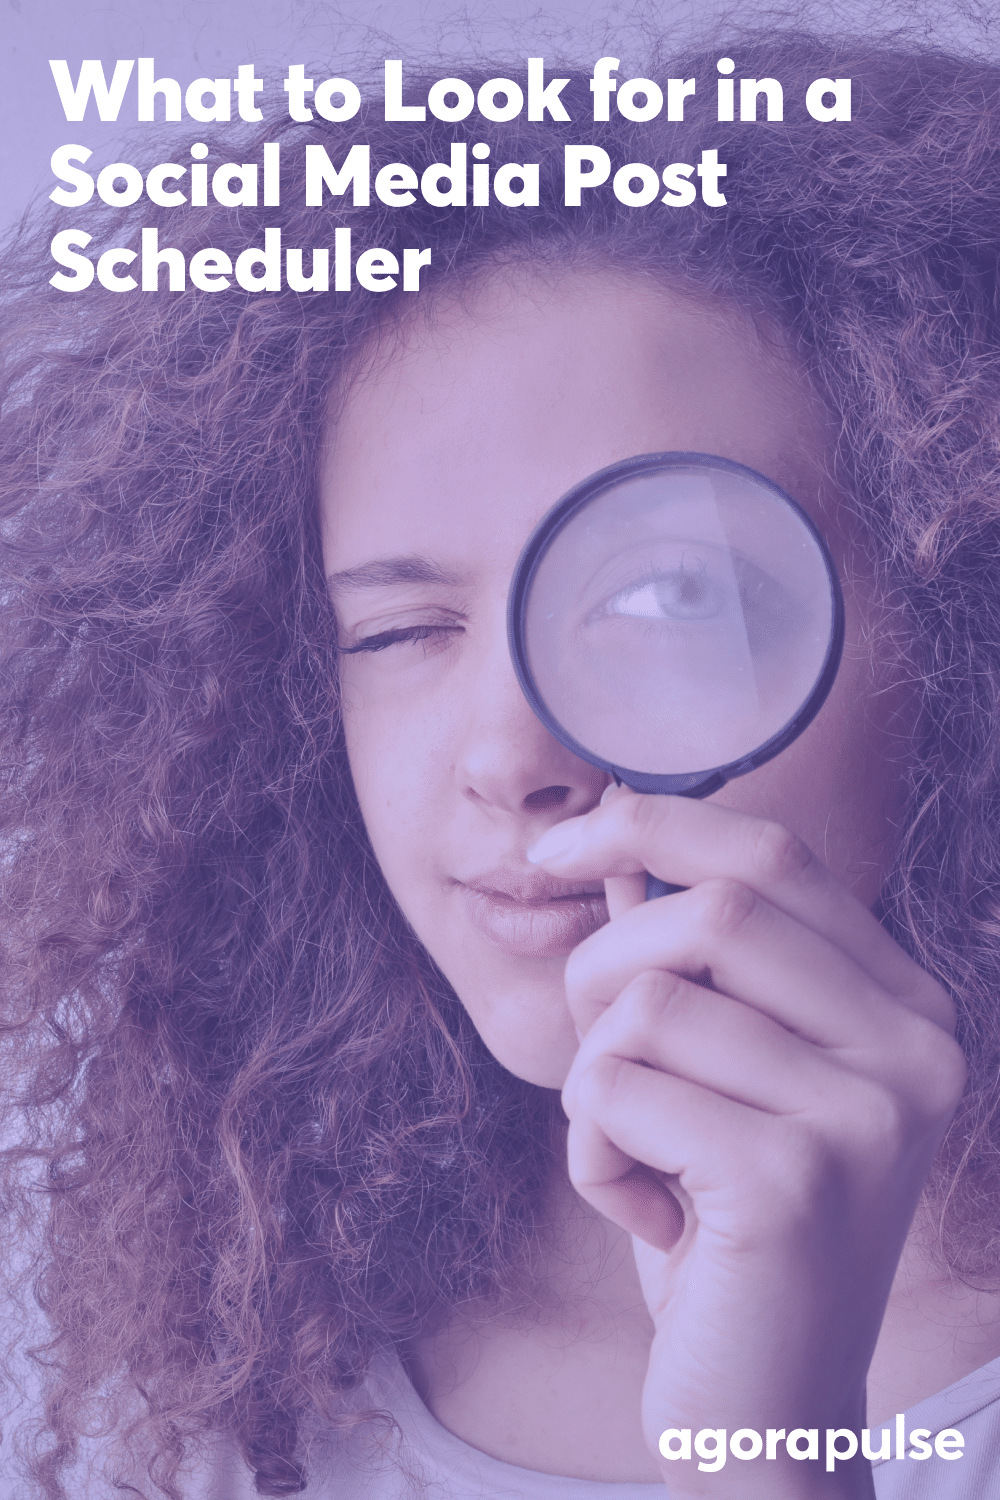 What to Look for in a Social Media Post Scheduler